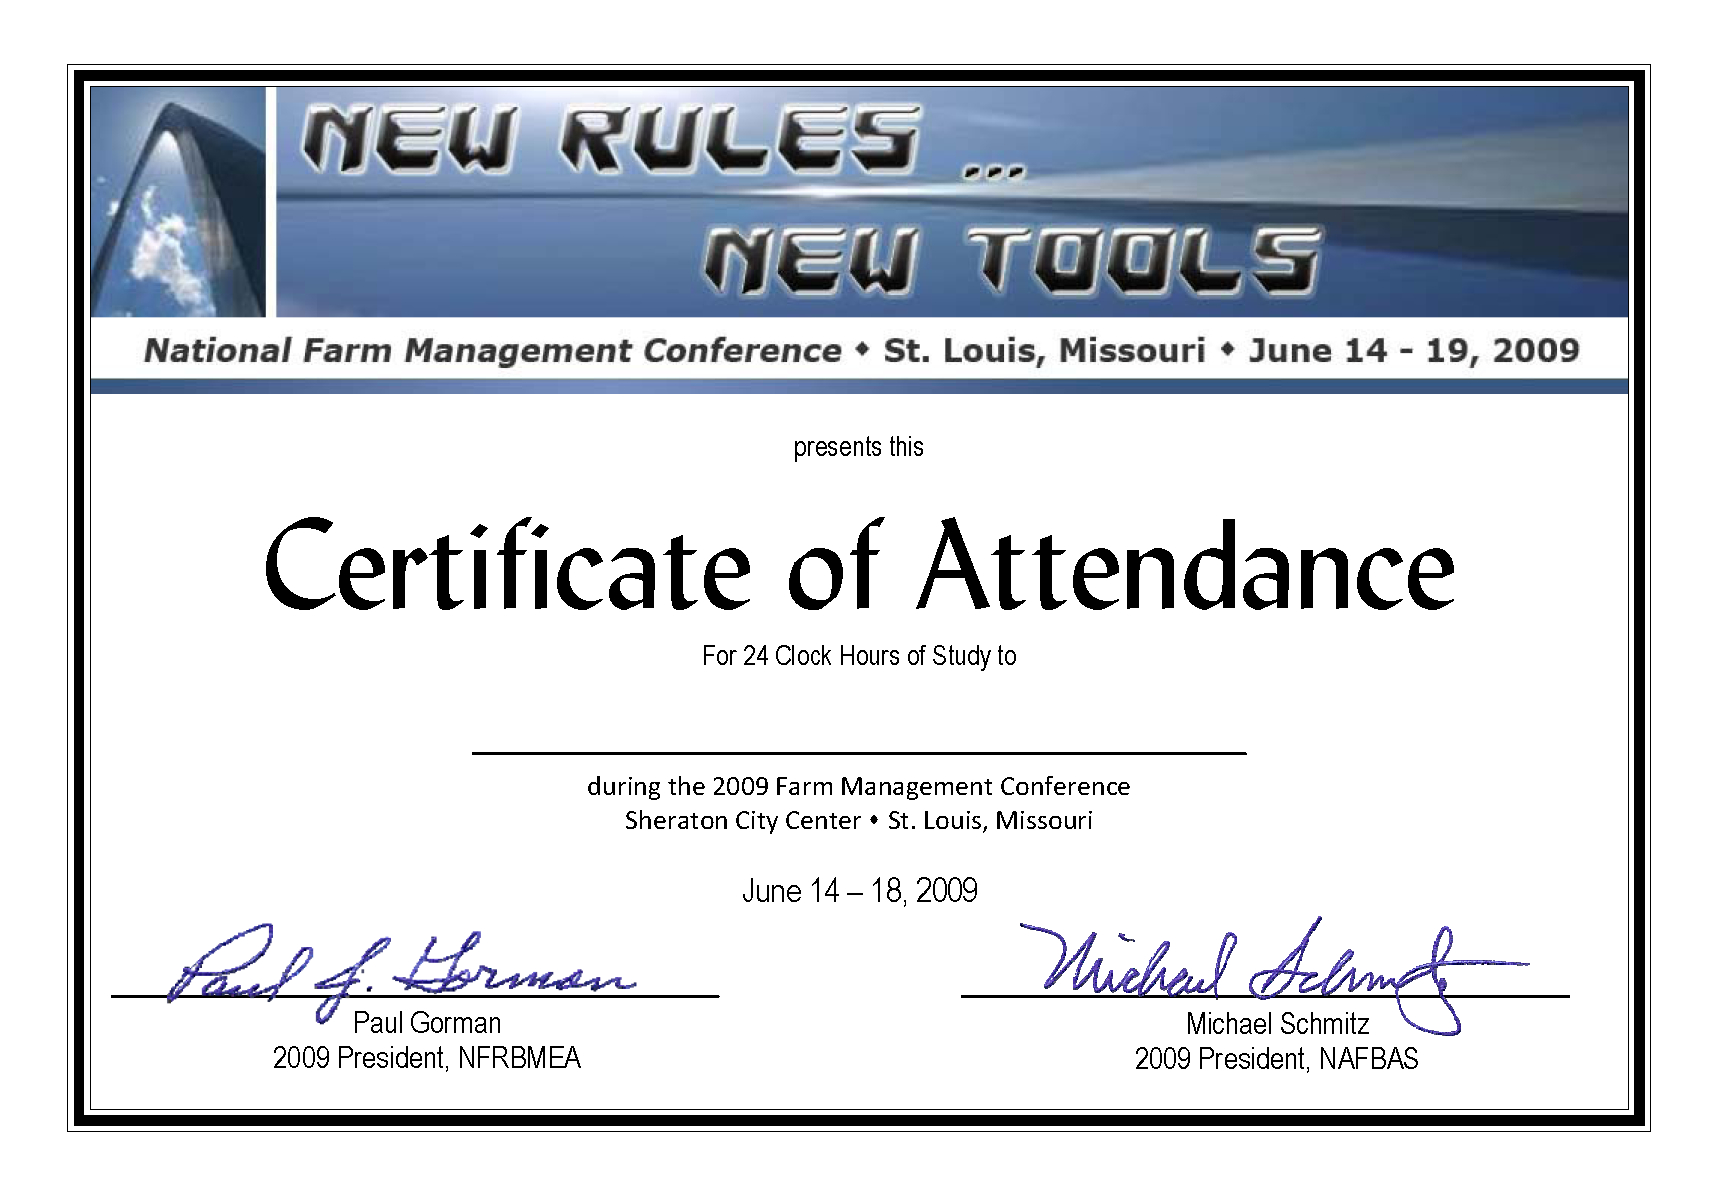 Conference Certificate Of Participation Template | Radiofixer.tk Intended For Conference Certificate Of Attendance Template